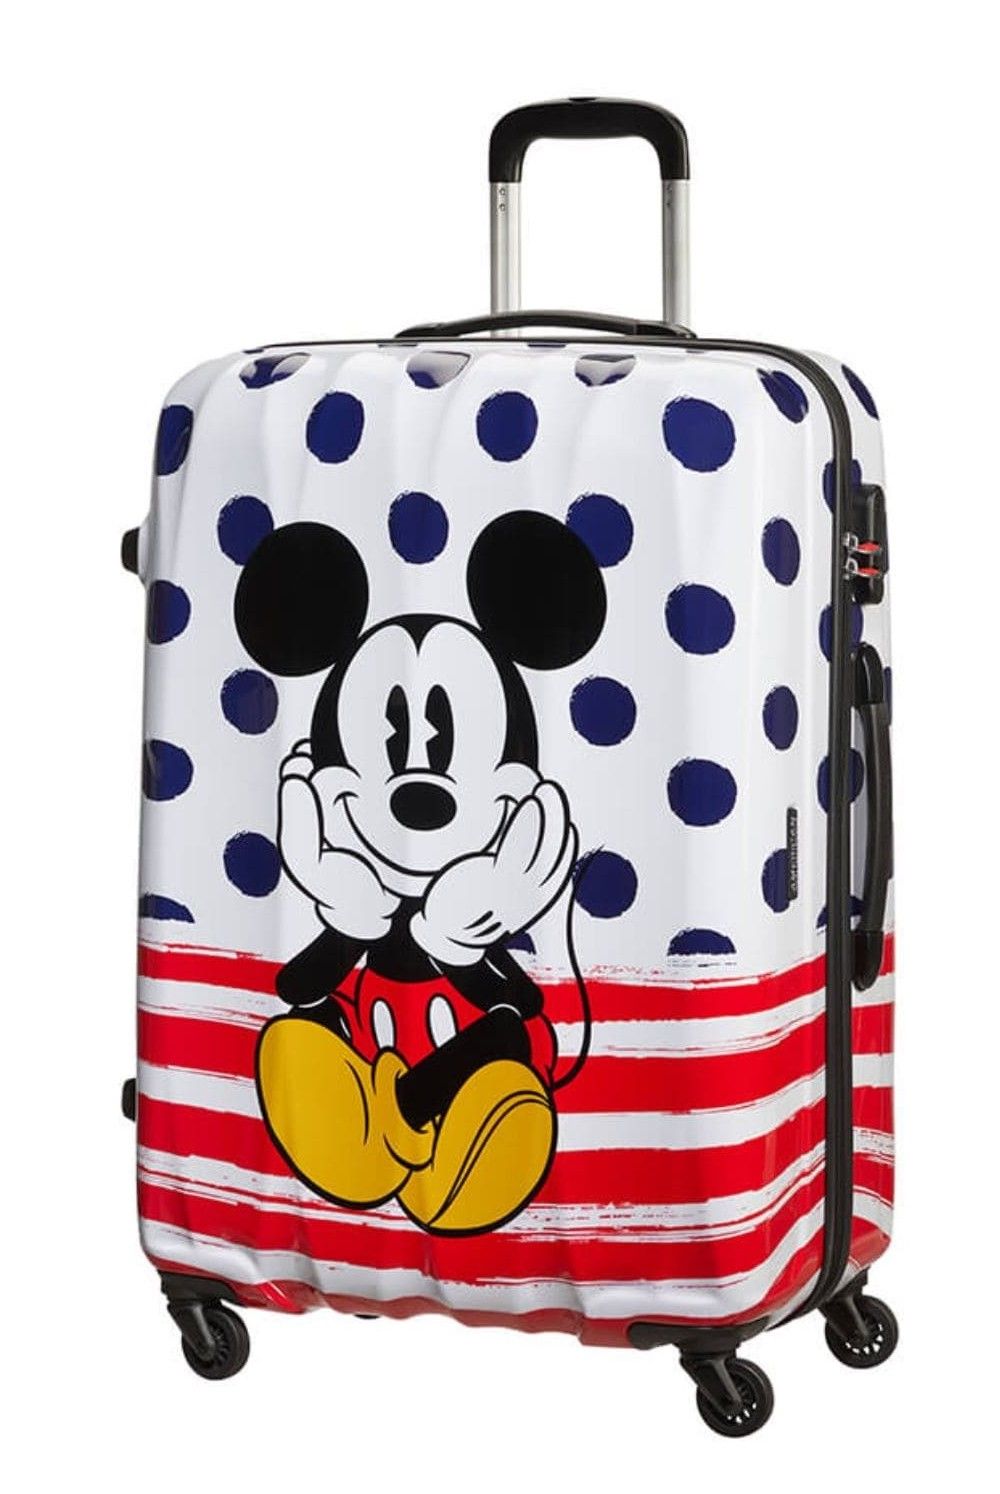 AT Kinderkoffer Mickey Blue Dots 75cm 88 Liter